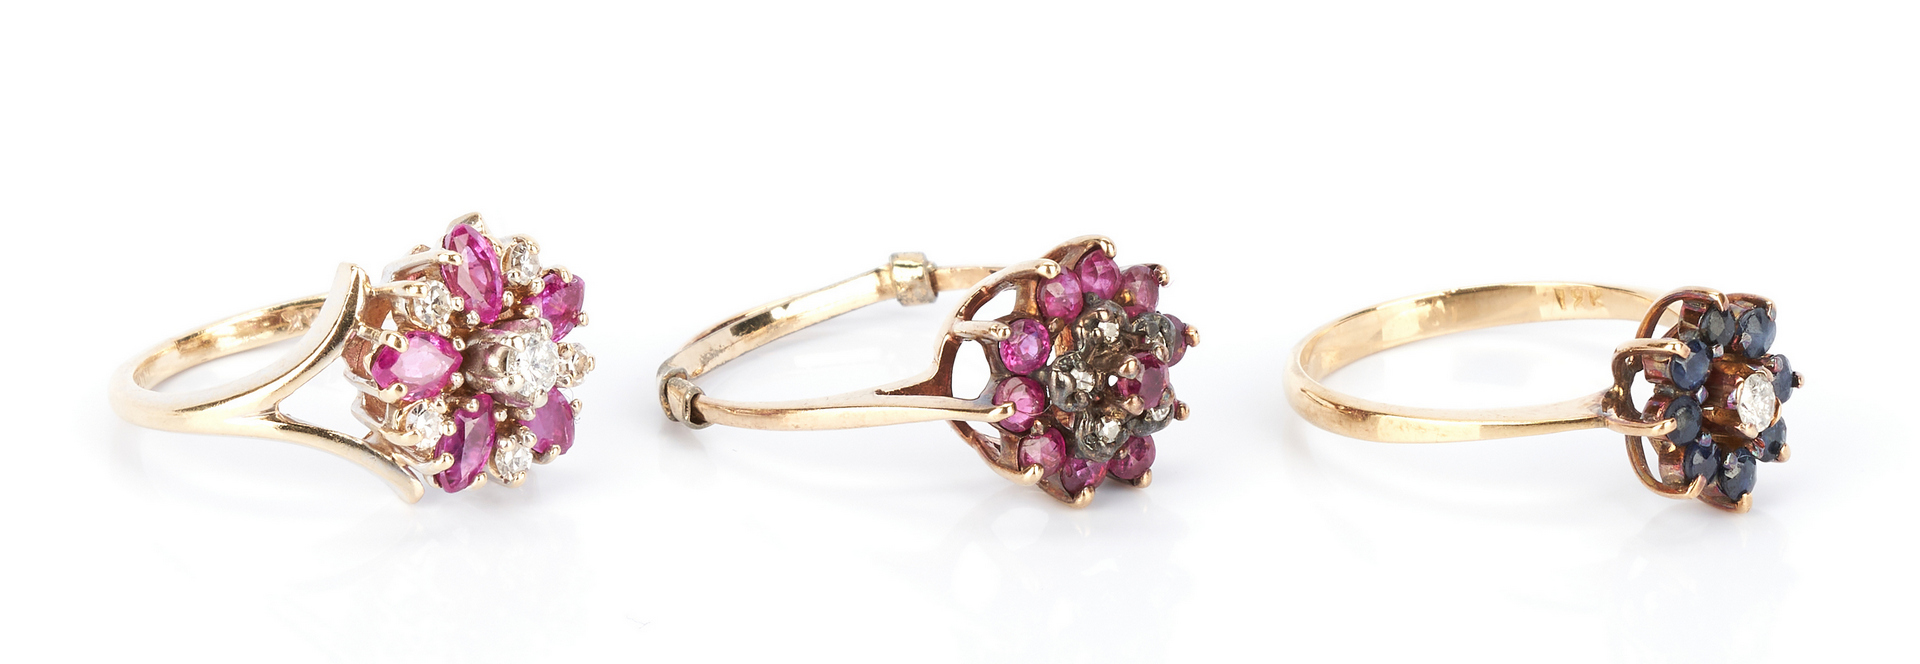 Lot 924: 5 Ladies 14K Ruby and Sapphire Rings